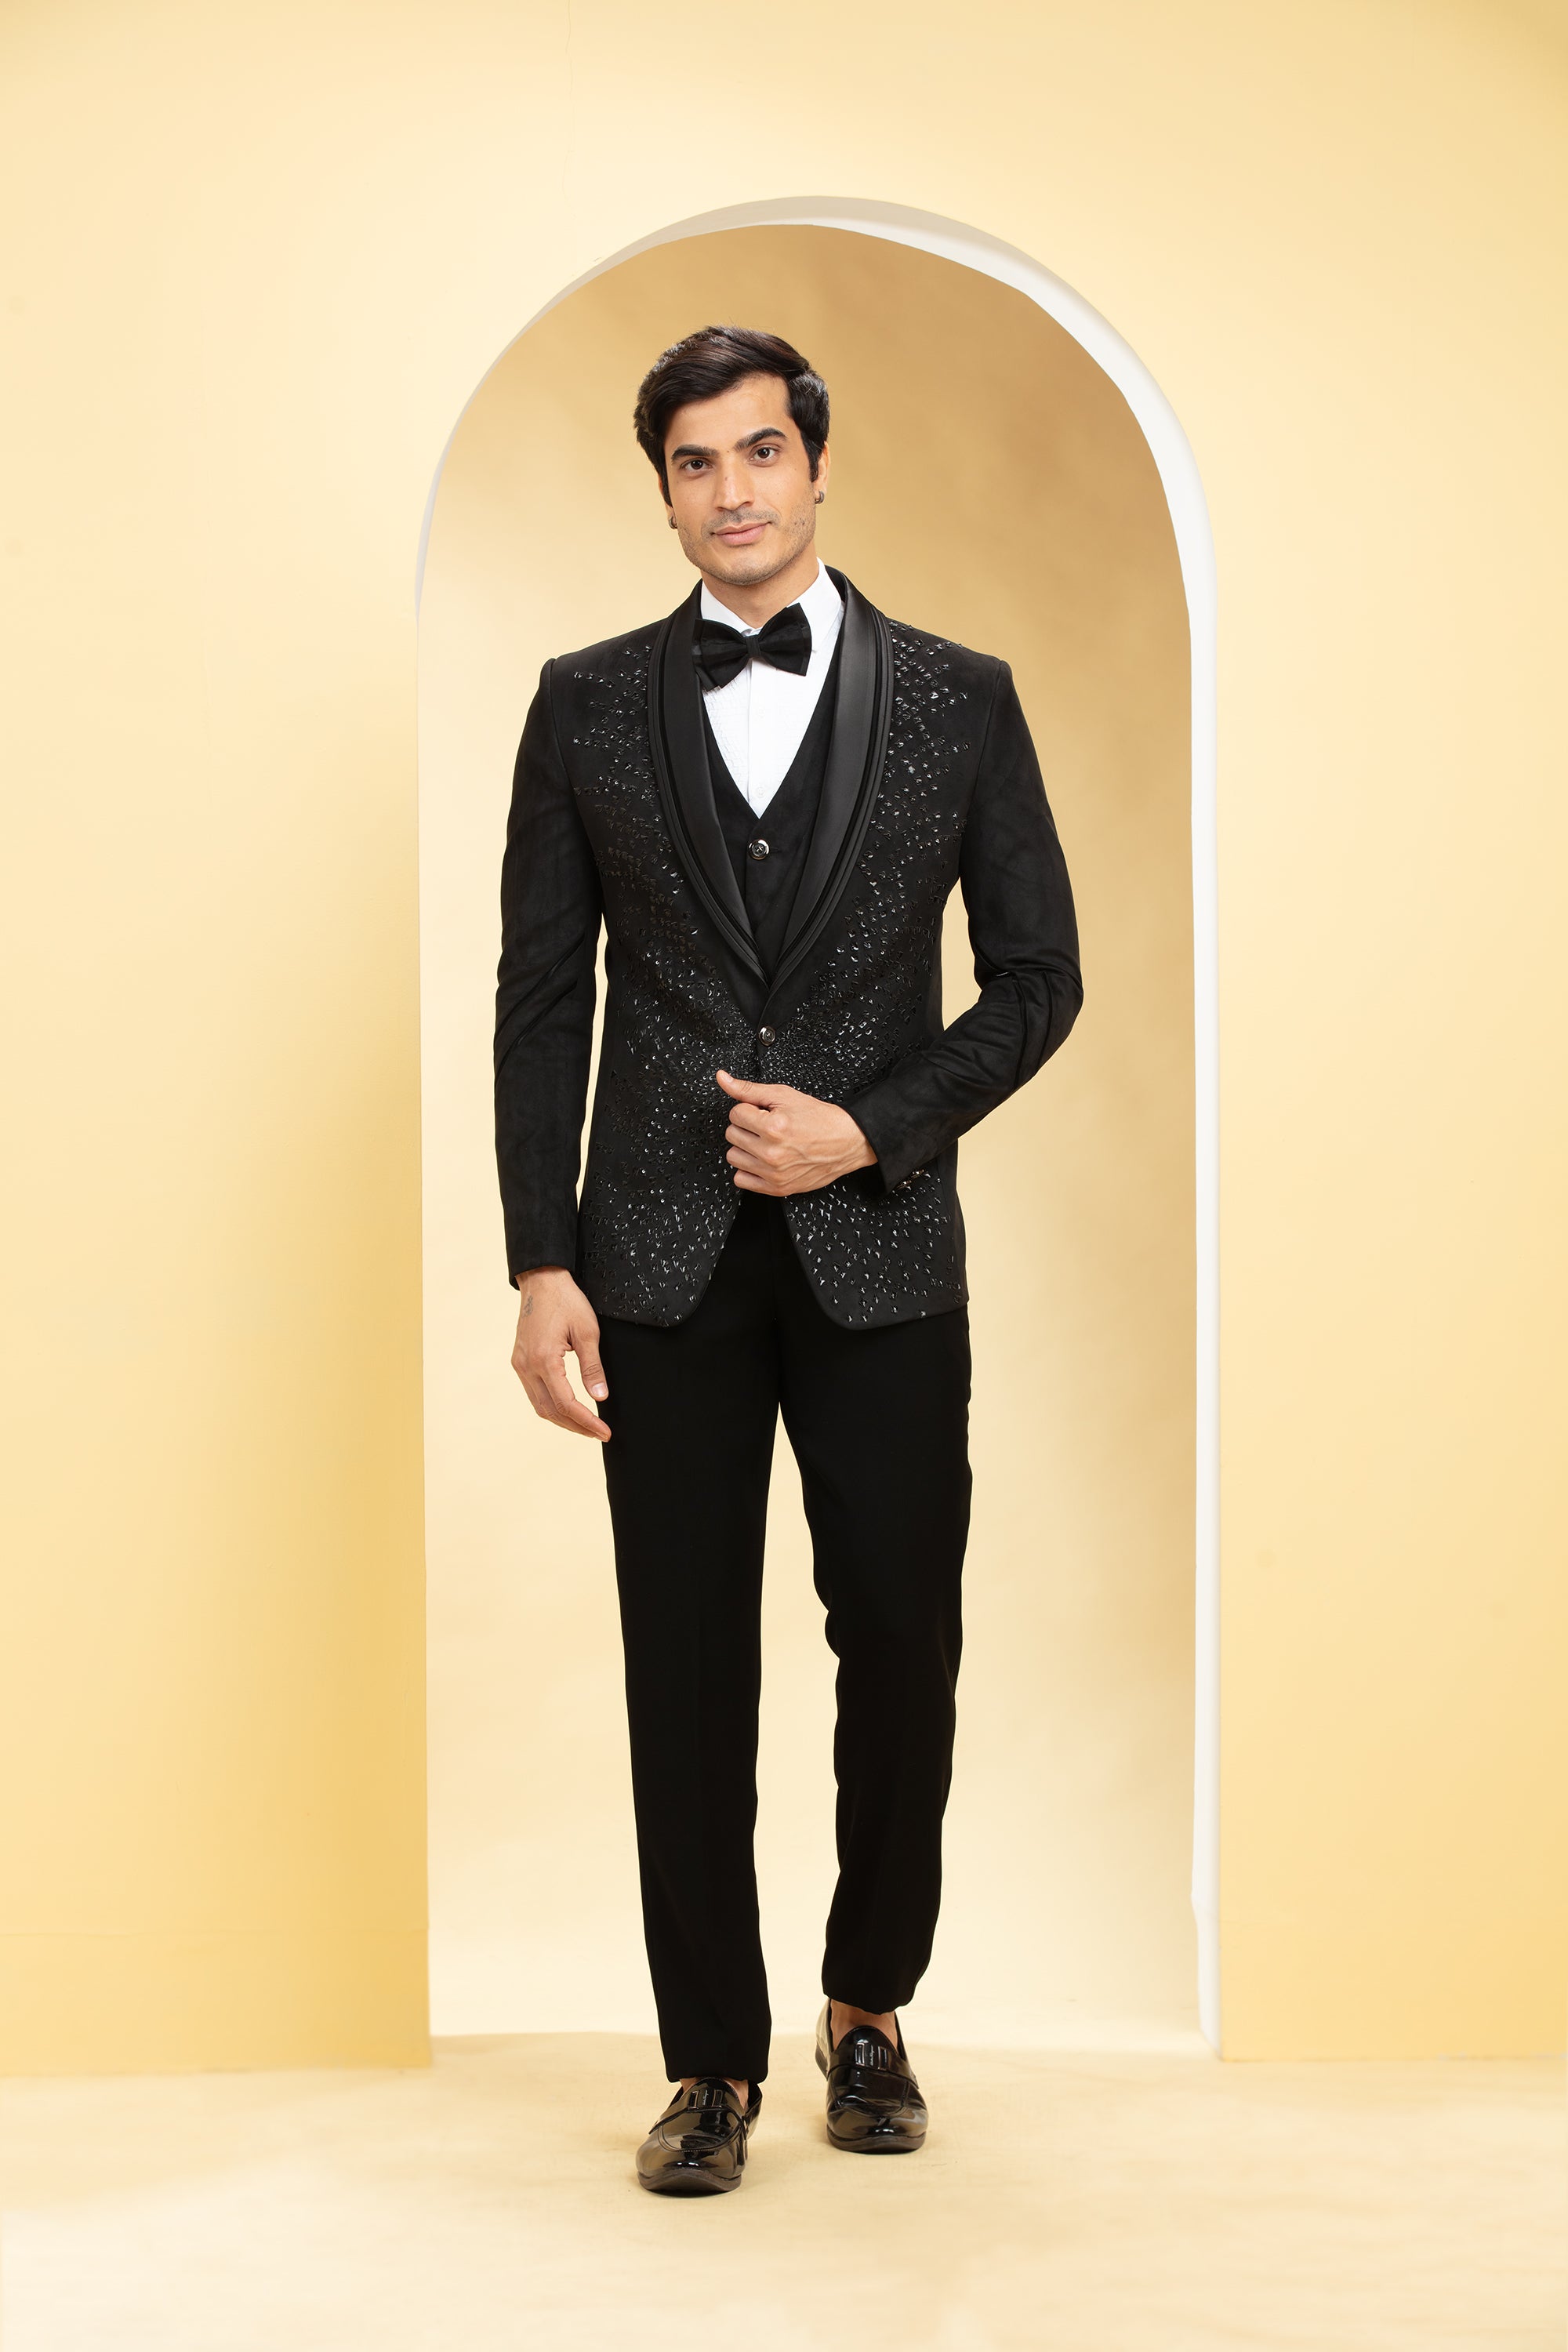 Sable Black Suede Tuxedo Set and Bow tie with Self cutdana work